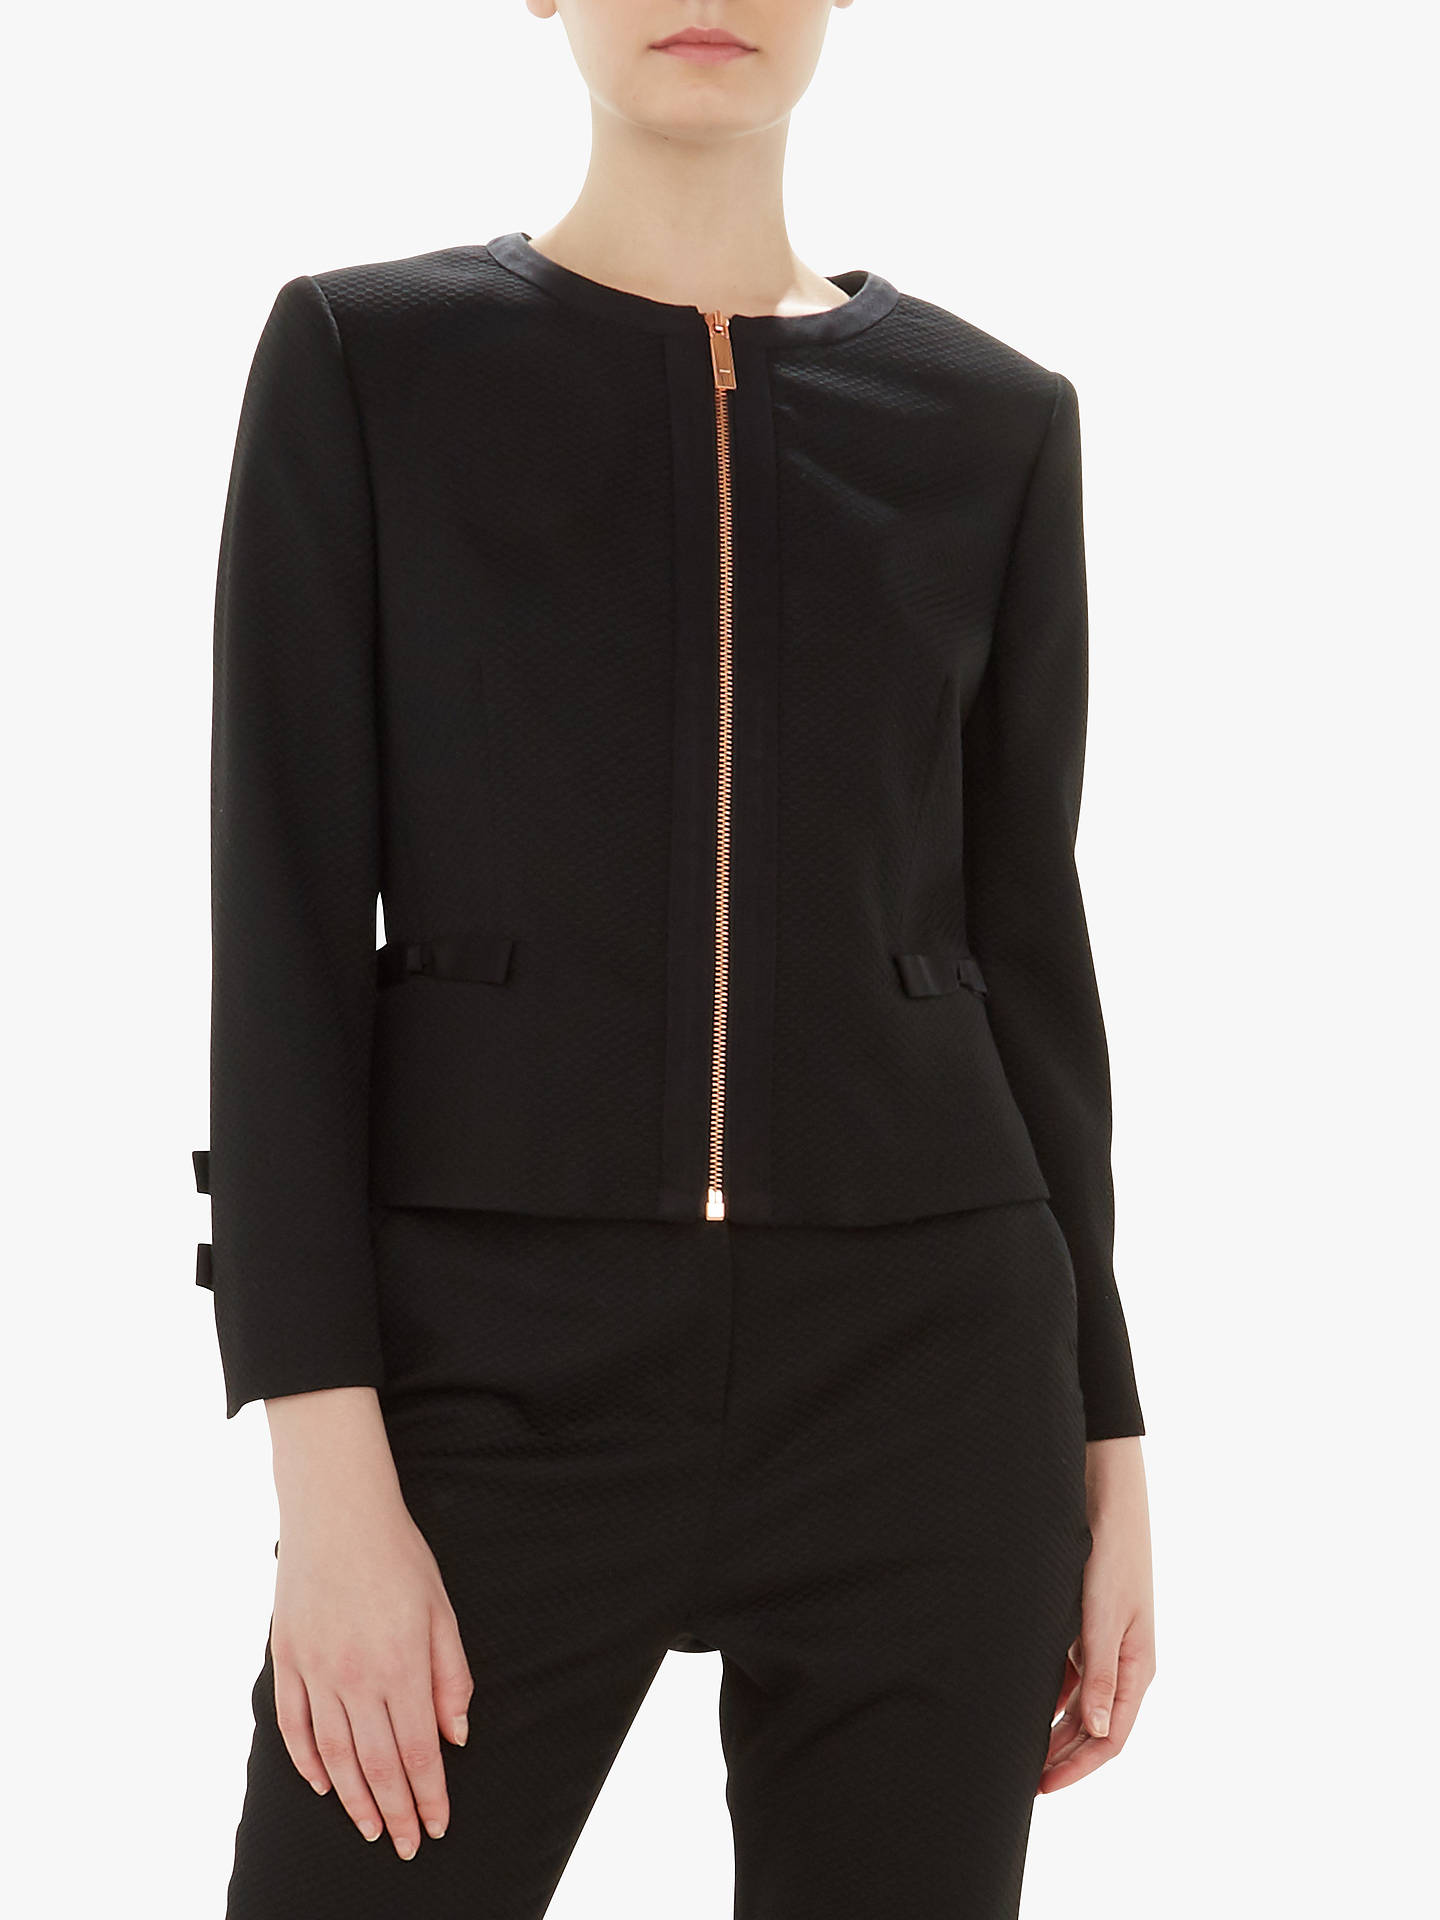 Ted Baker Nadae Cropped Bow Textured Jacket, Black at John Lewis & Partners